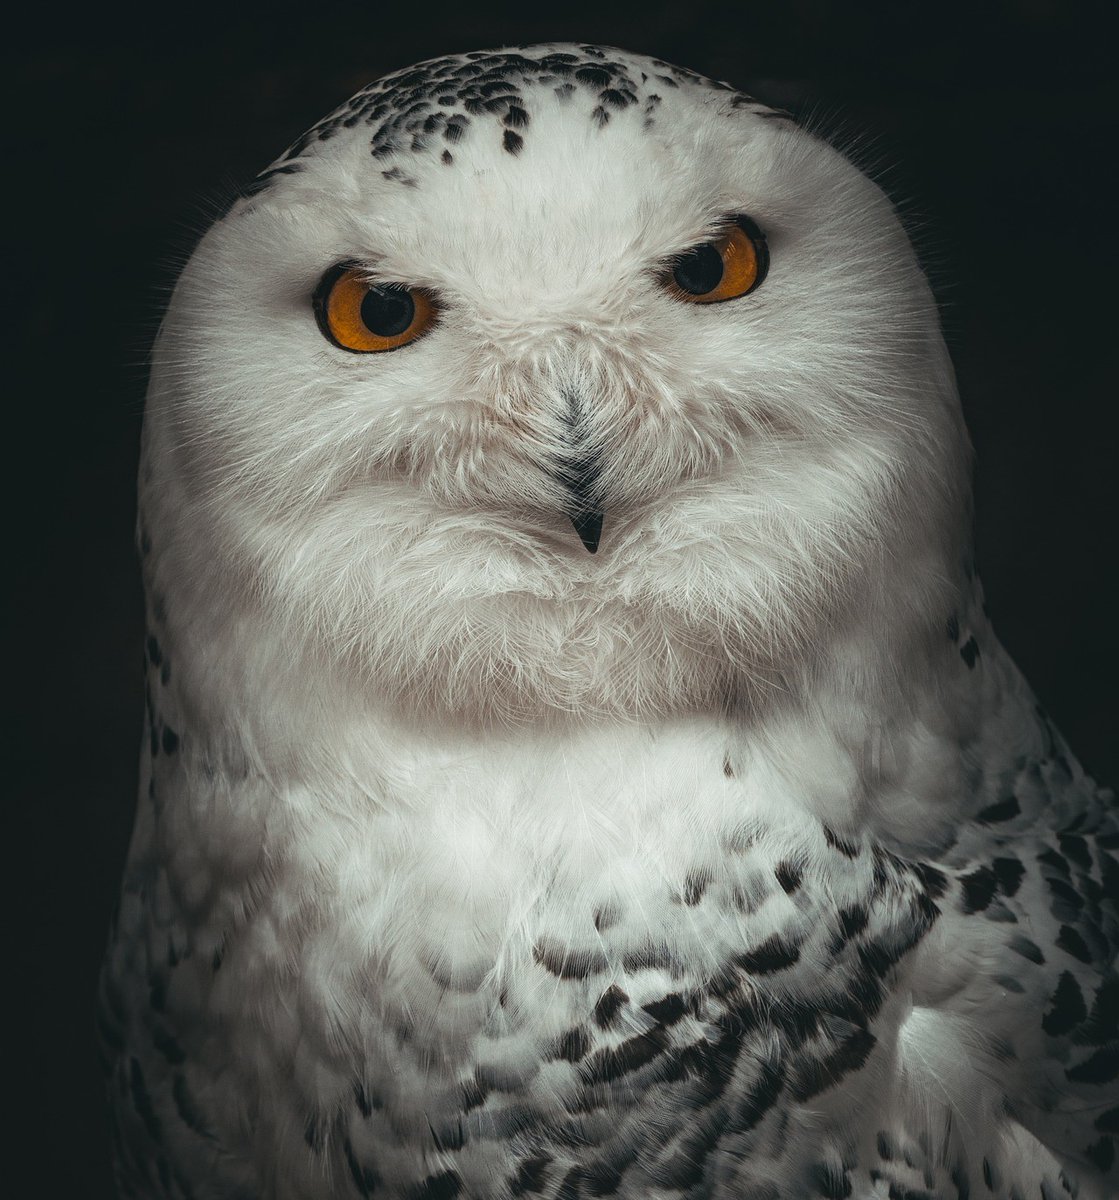 Blanche is not at all sure about this #summer stuff!

#whiteowl #snowyowl #owlsome #Vermont #radio #mystery #shortstory #mysterywriter #cozymystery #cozywithatwist